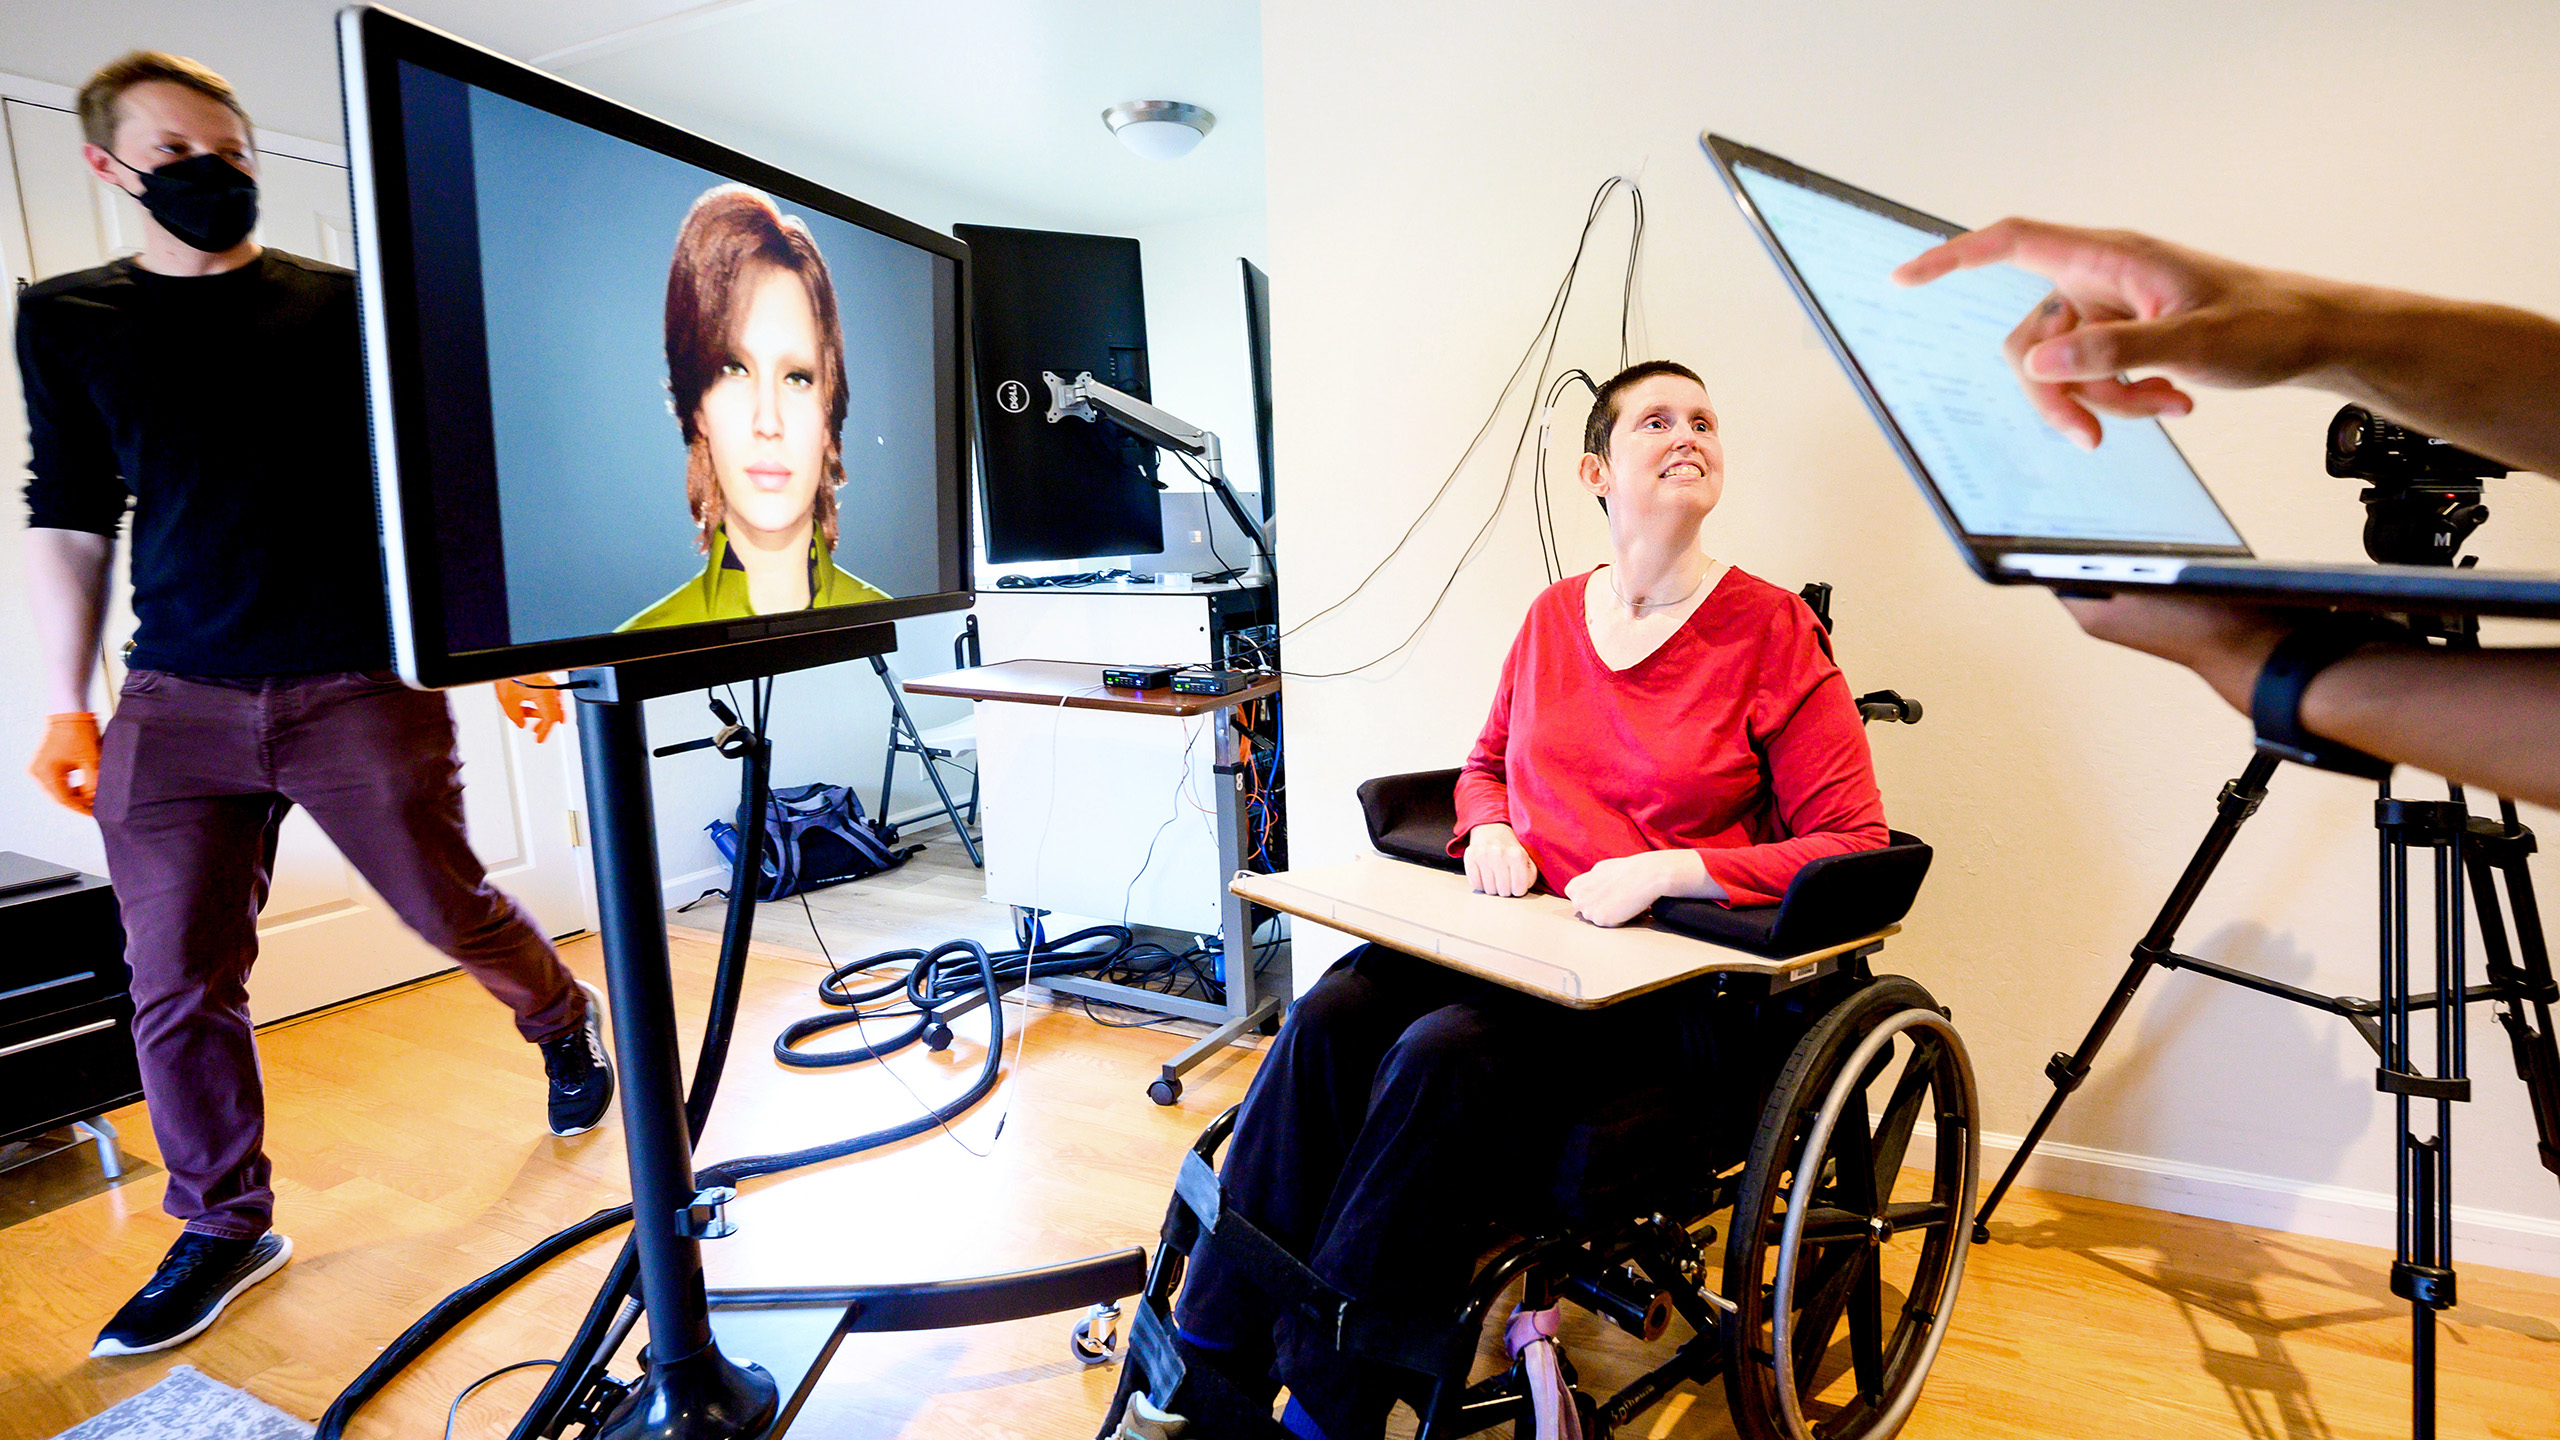 Ann, a research participant in the Eddie Chang-led study of speech neuroprostheses, uses a digital link wired to her cortex to interface with an avatar. At left is UCSF clinical research coordinator Max Dougherty.